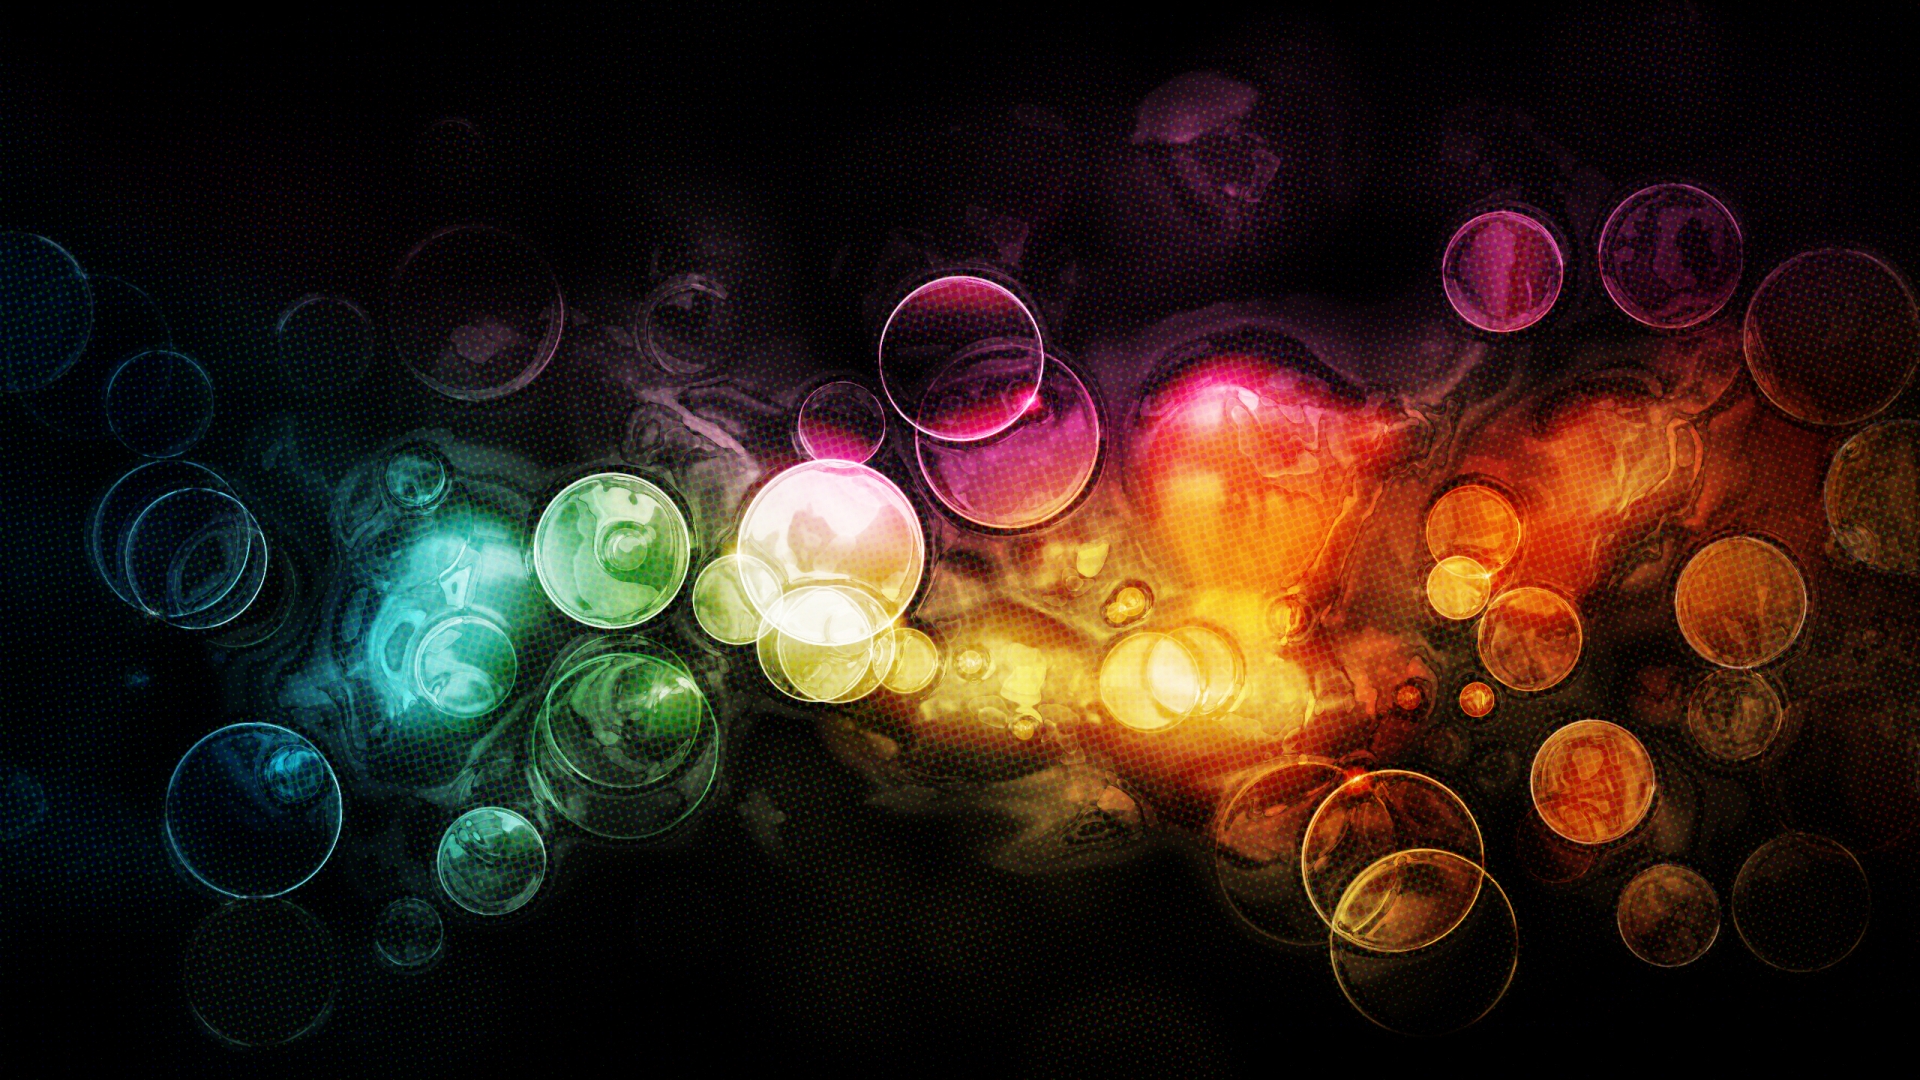 Colourful Circles for 1920 x 1080 HDTV 1080p resolution